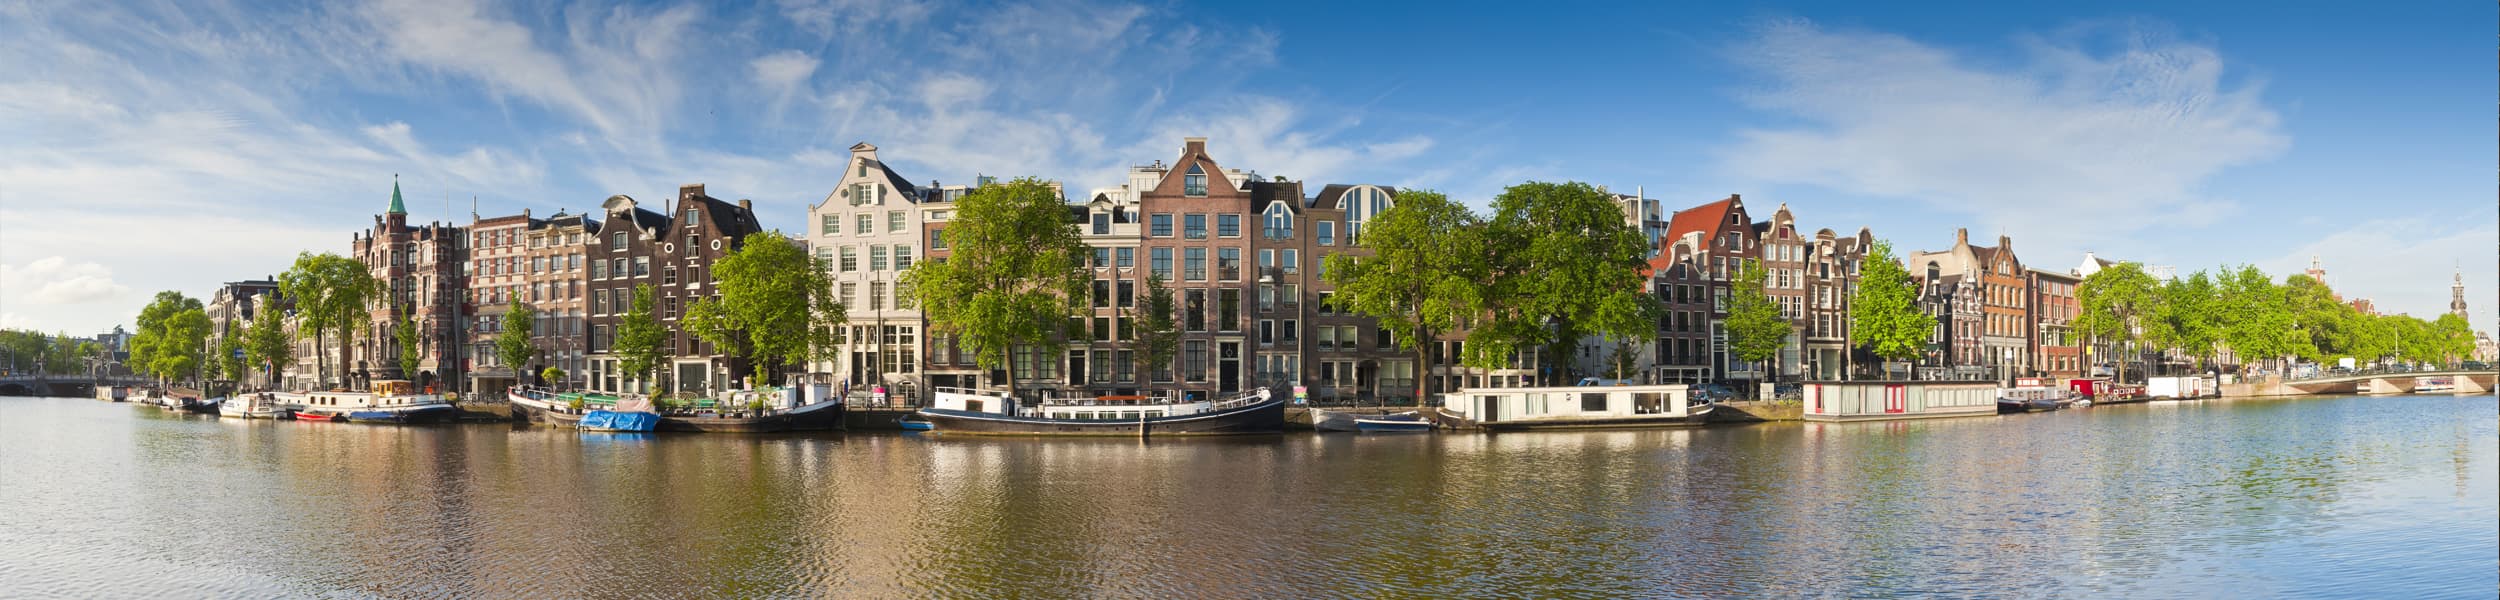 Java Software Engineer – Operational Excellence Amsterdam, the Netherlands